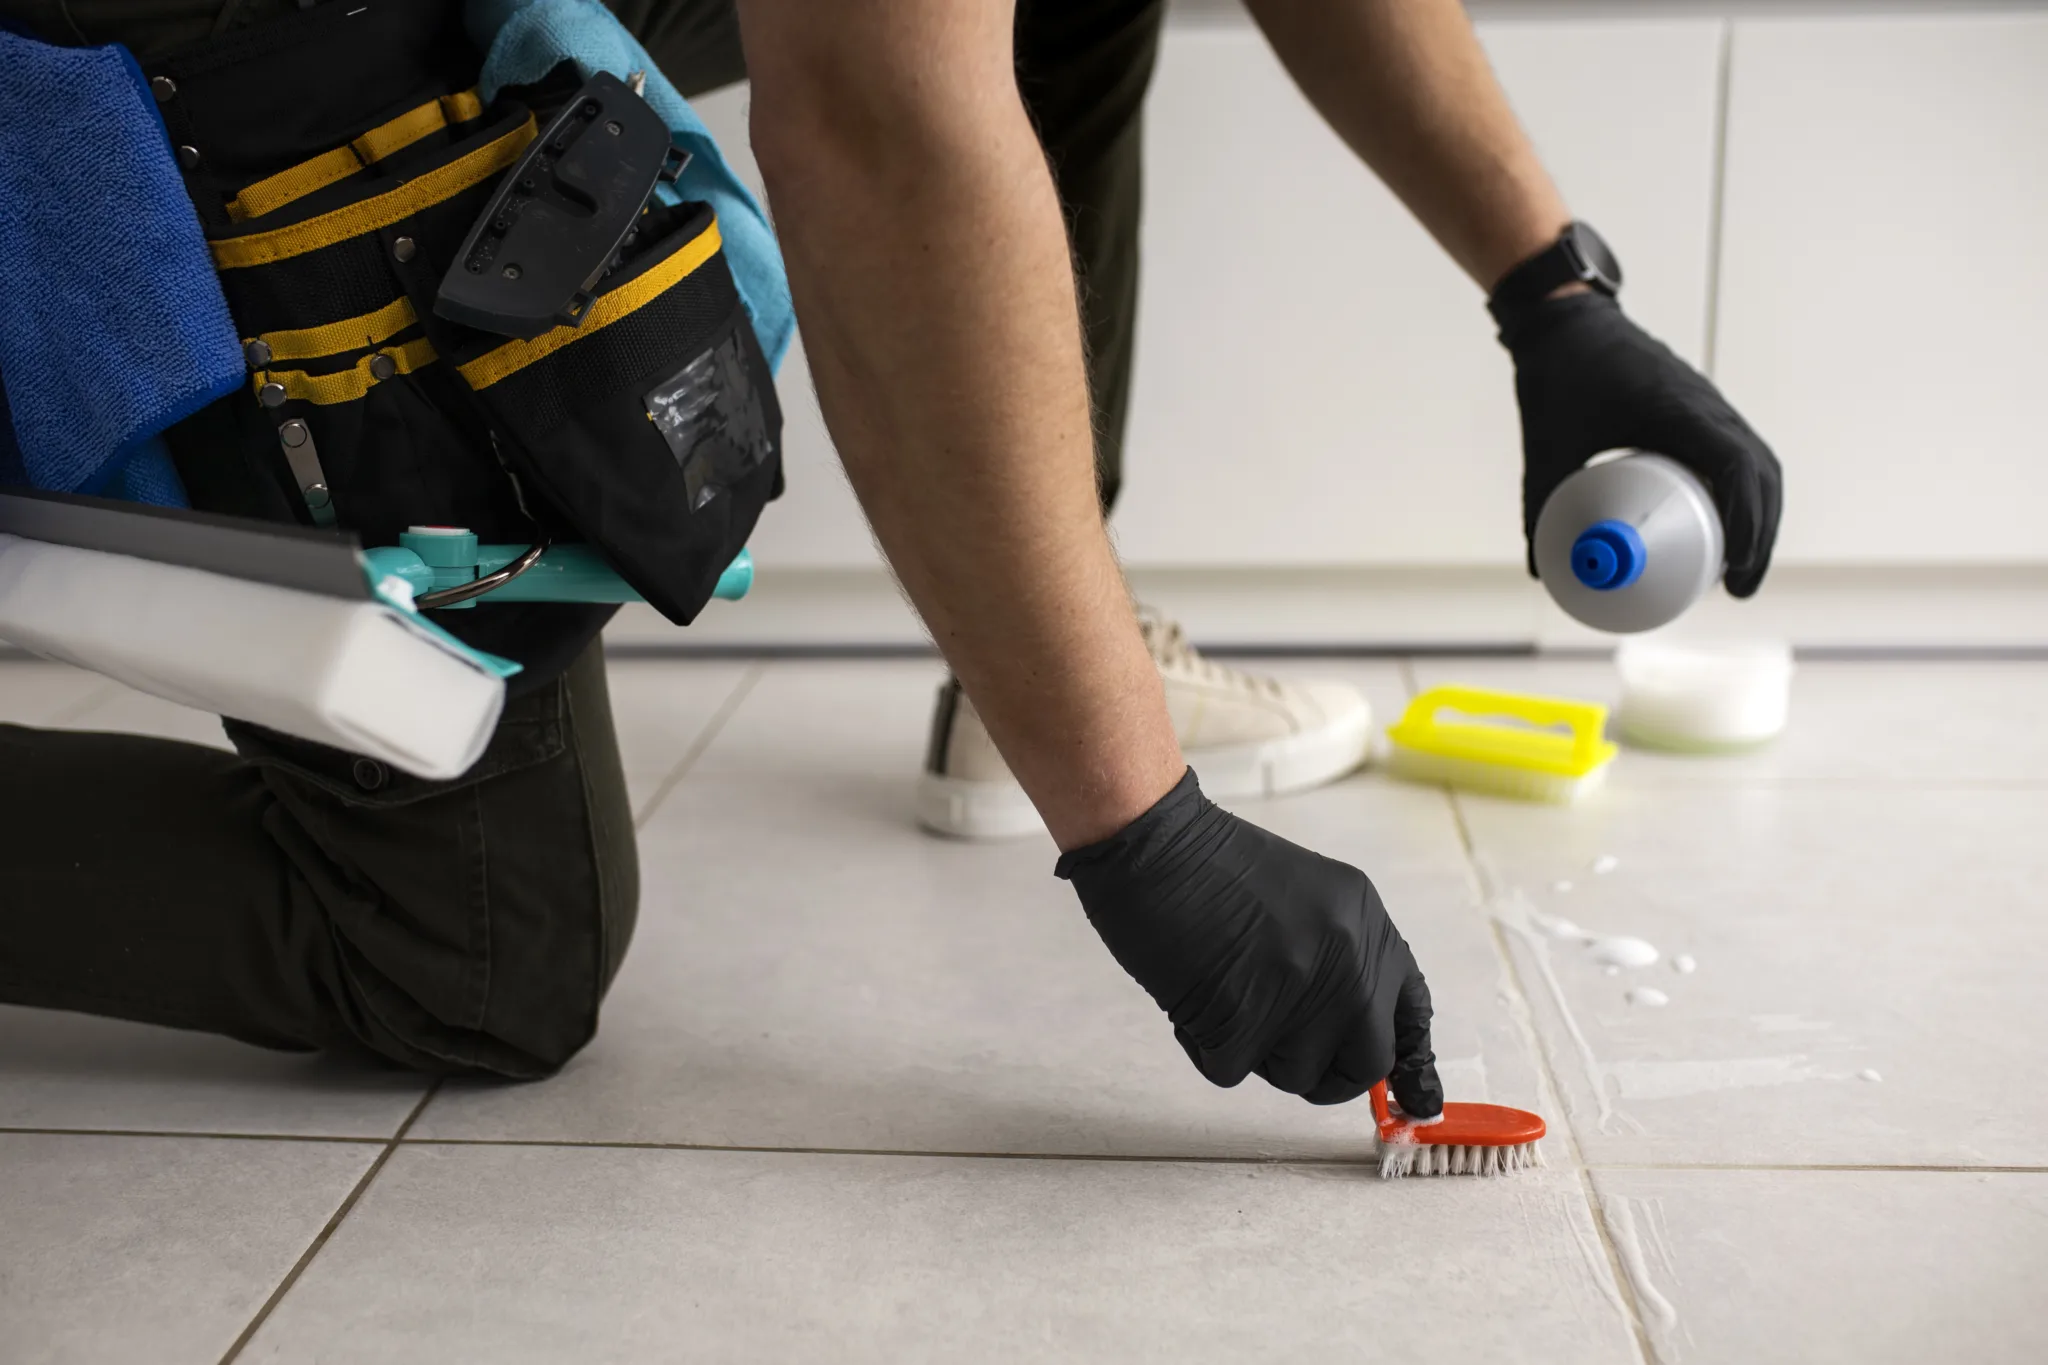 How to Clean Marley Floors